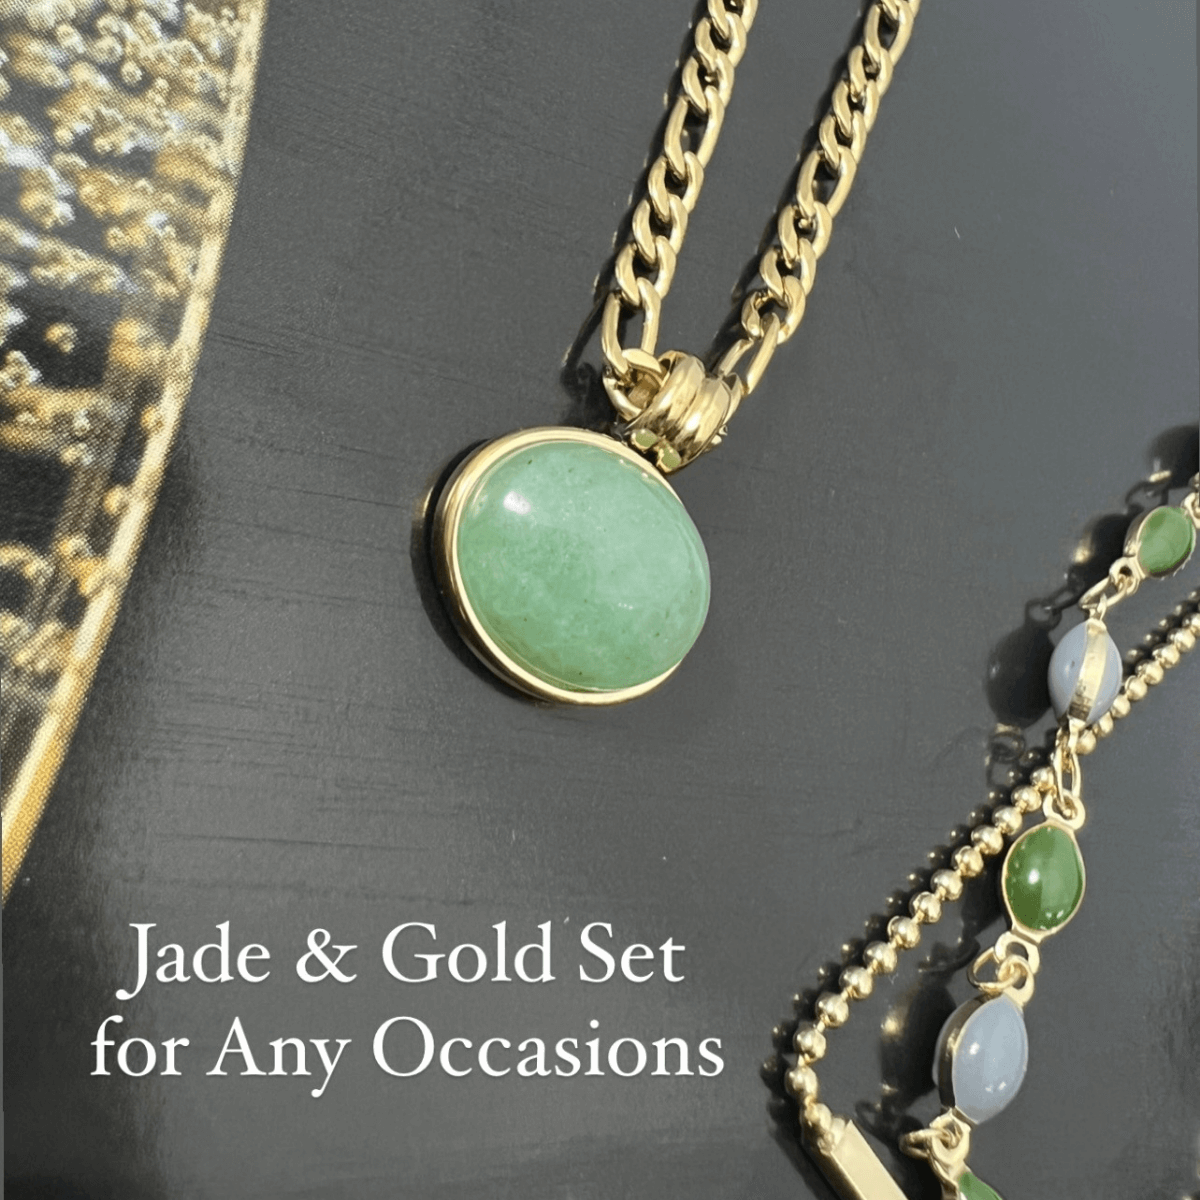 1# BEST Gold Jade Pendant Necklace Jewelry Gift for Women | #1